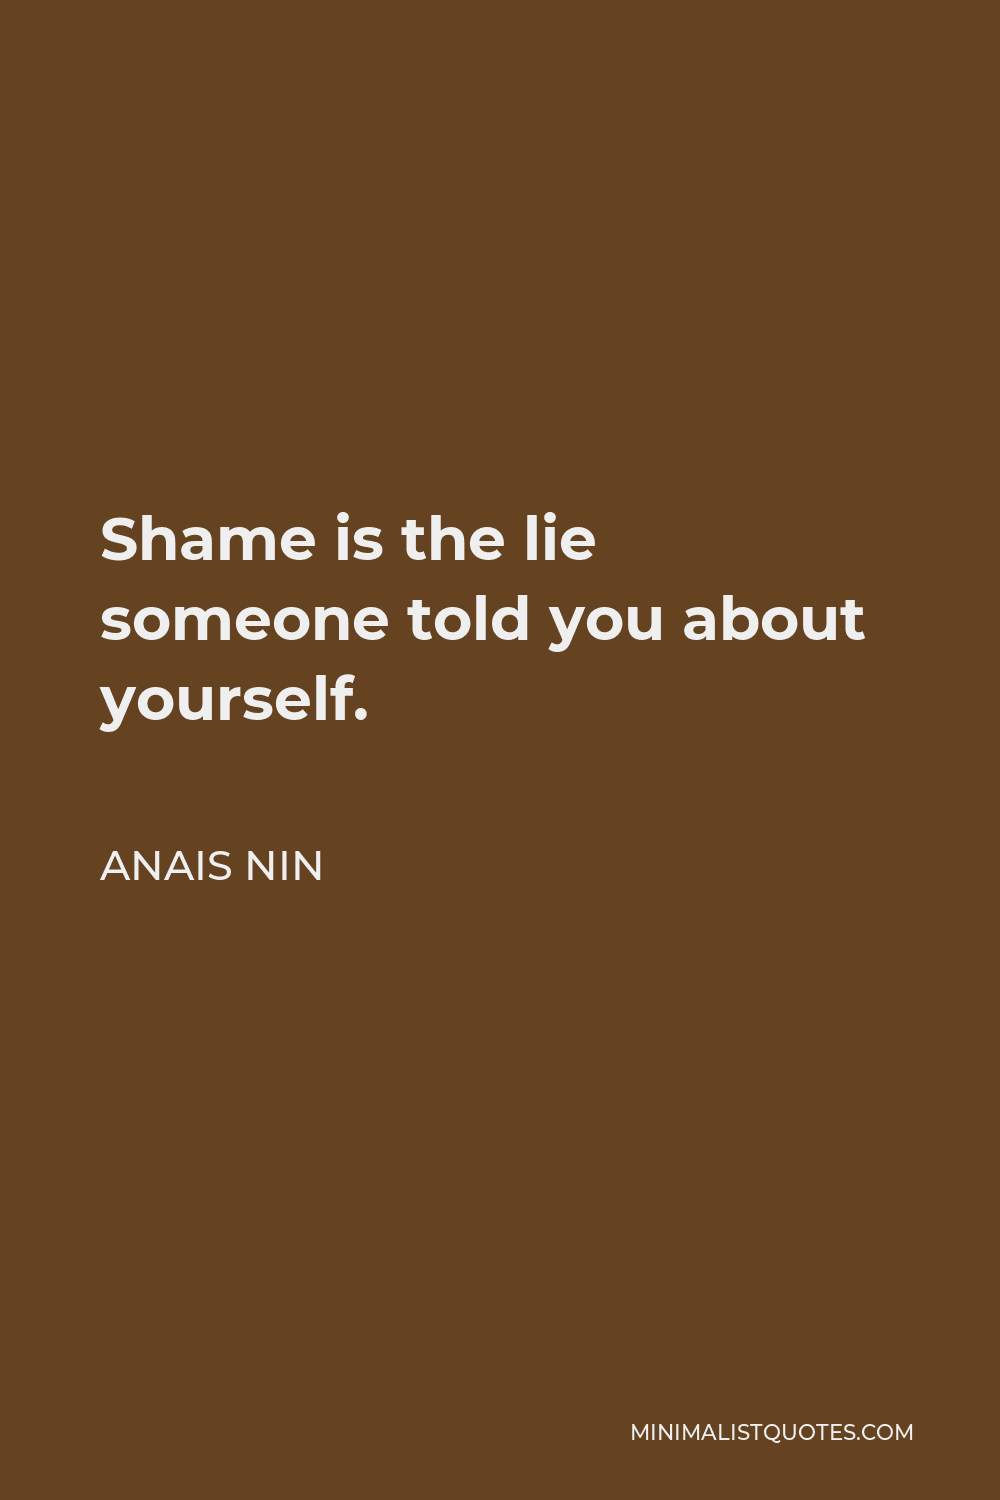 Anais Nin Quote - Shame is the lie someone told you about yourself.